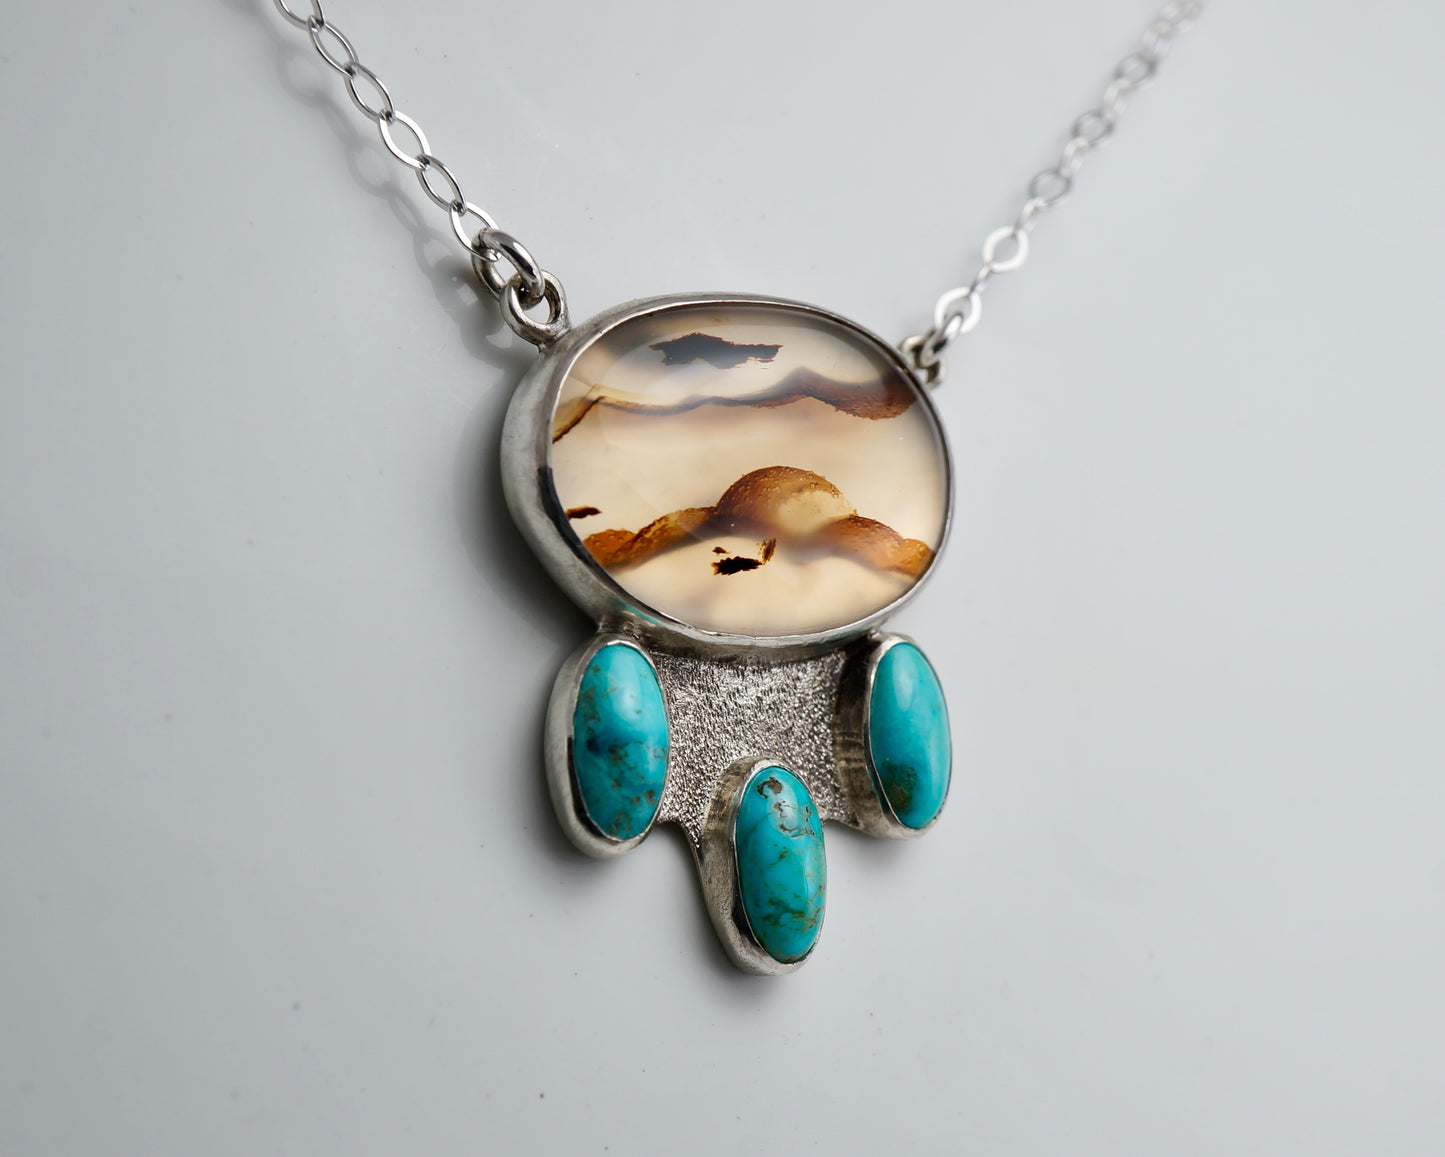 Montana Agate and Turquoise Necklace